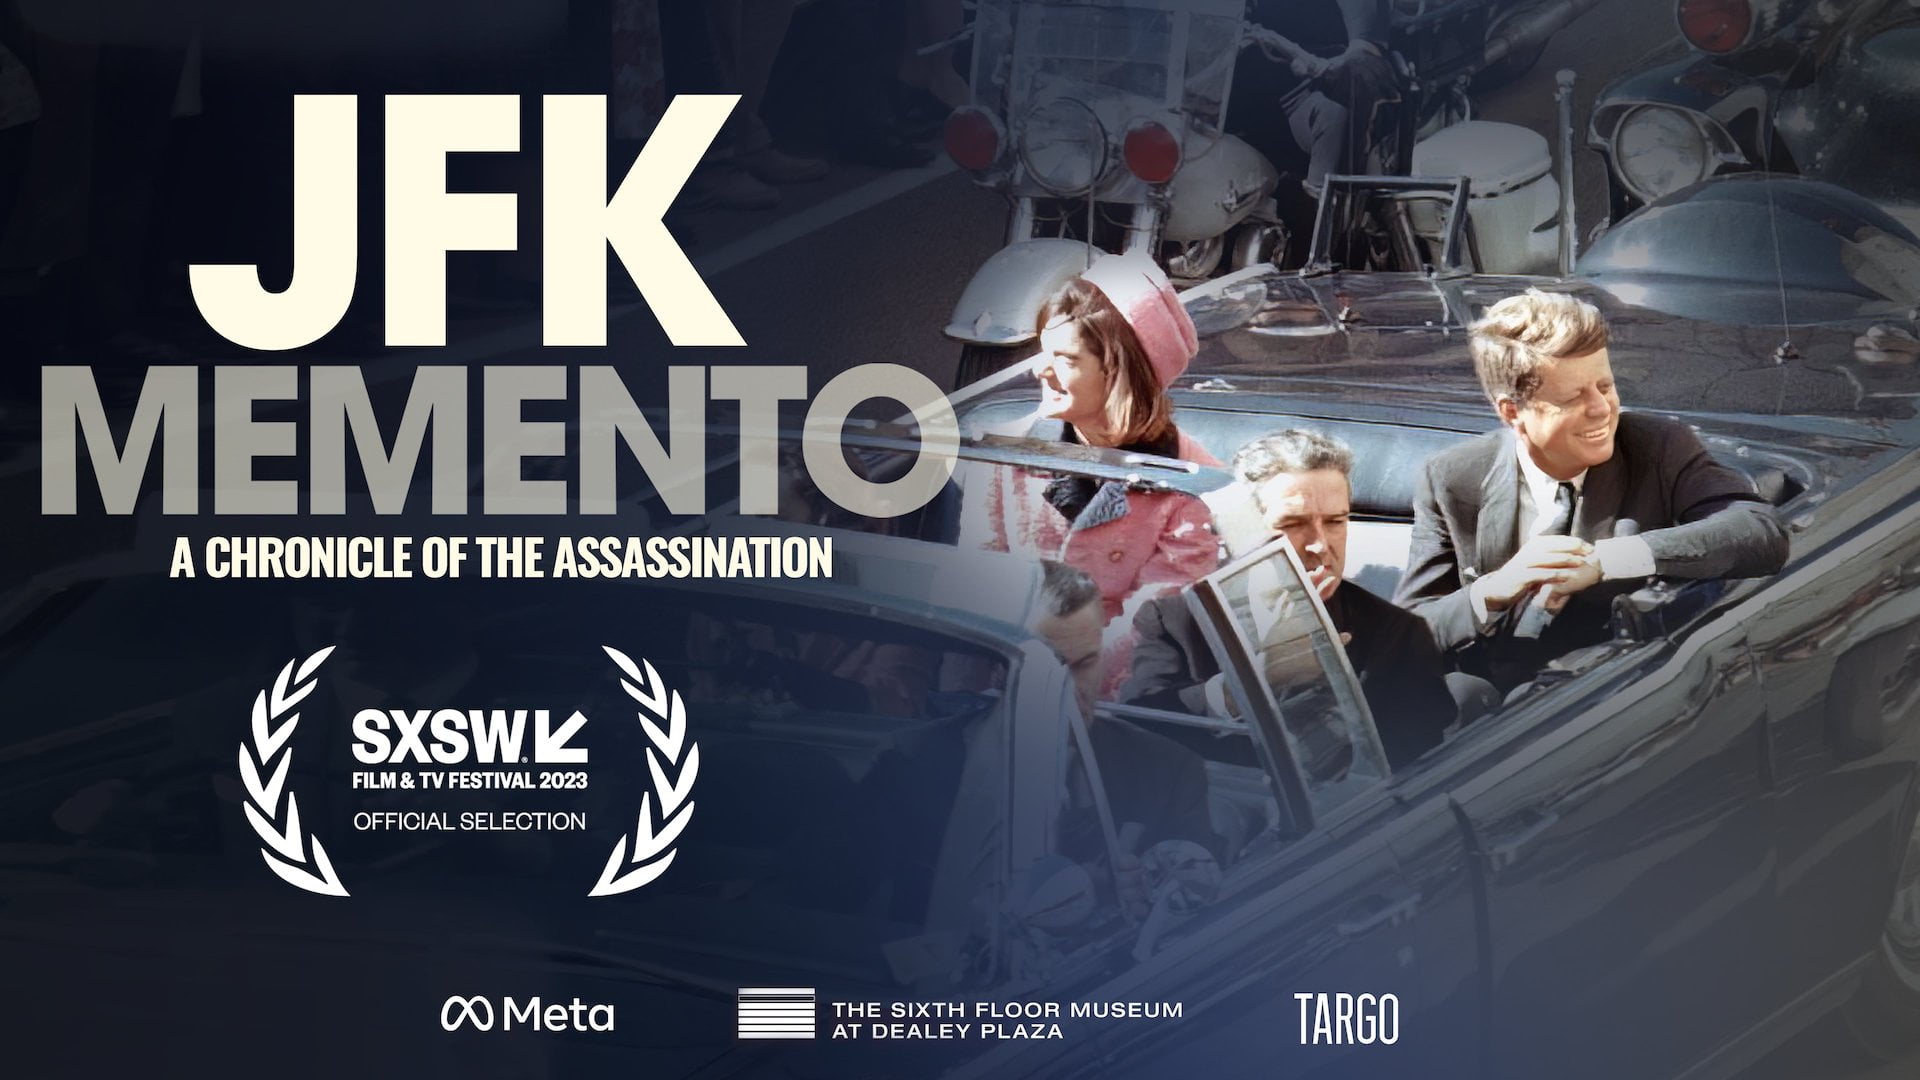 The assassination of JFK gains another dimension in Meta’s new VR documentary